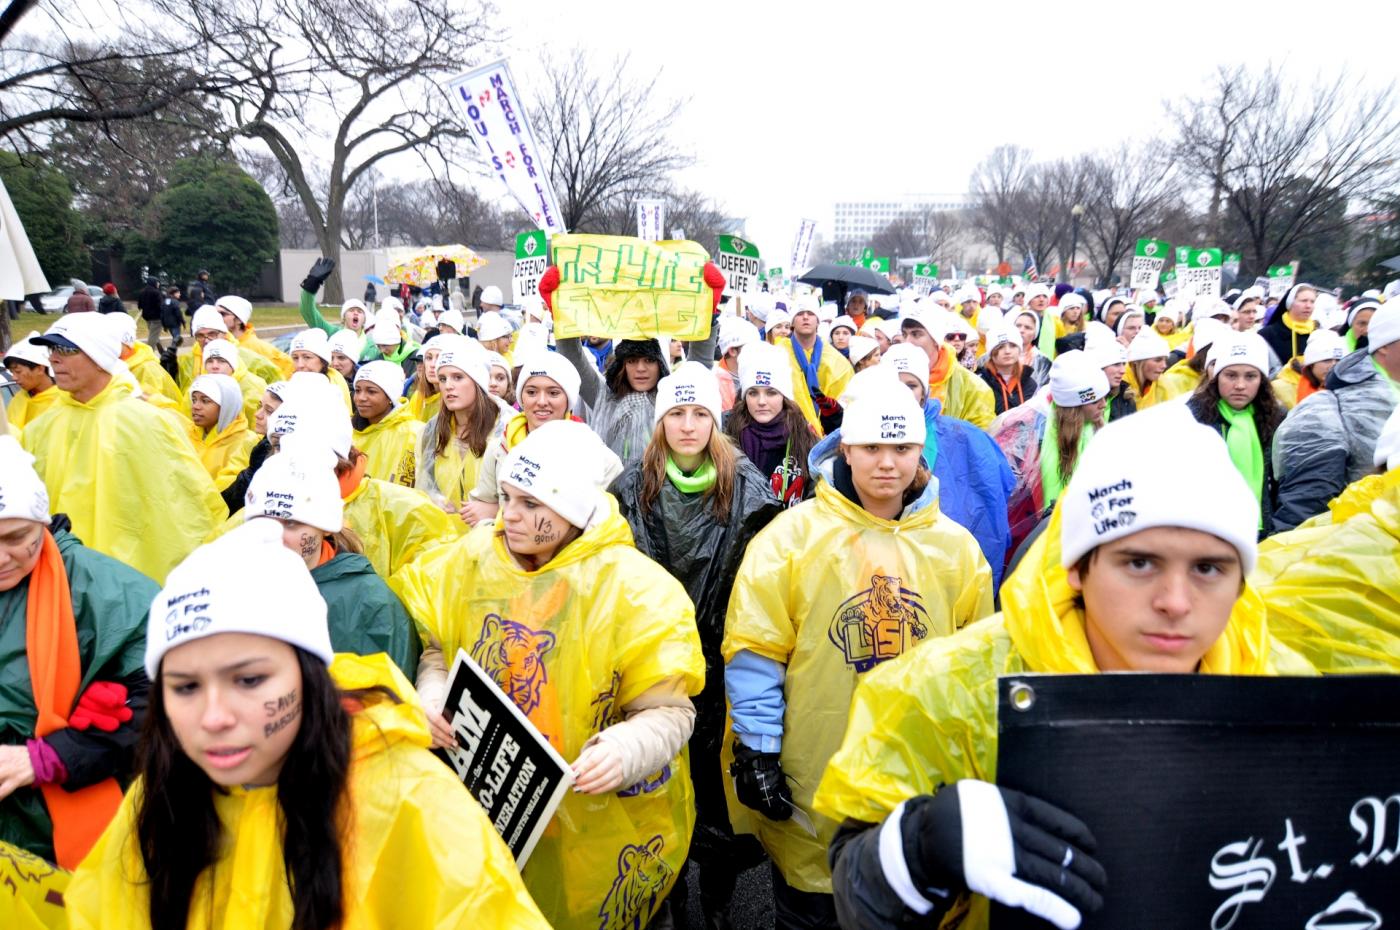 Students from Louisiana walk along the streets in Washington on Monday to protest the 39th anniversary of the Roe v. Wade Supreme Court ruling that made abortion legal. Hundreds of thousands of people joined in the annual March for Life. (Salvador Guerrero/SHFWire)